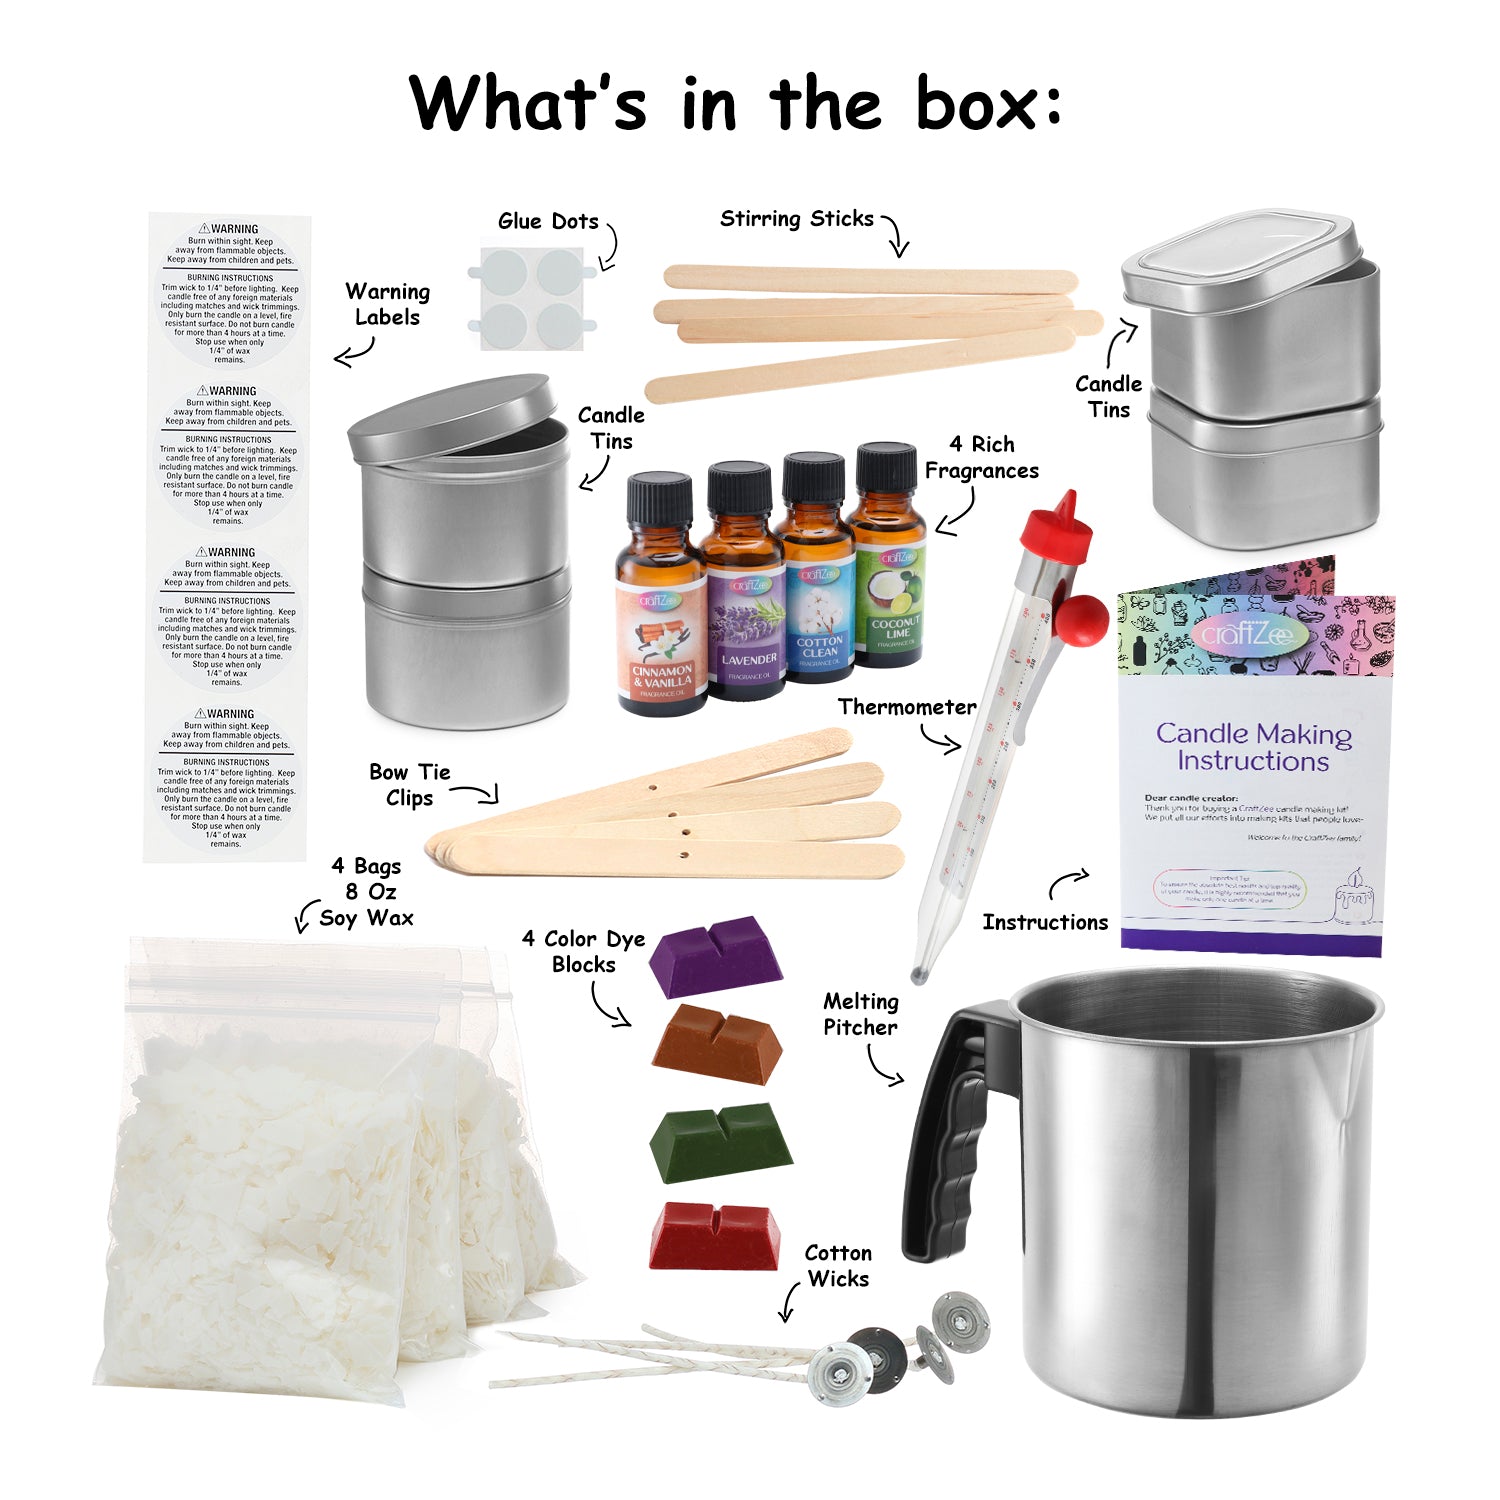 Complete DIY Candle Making Kit